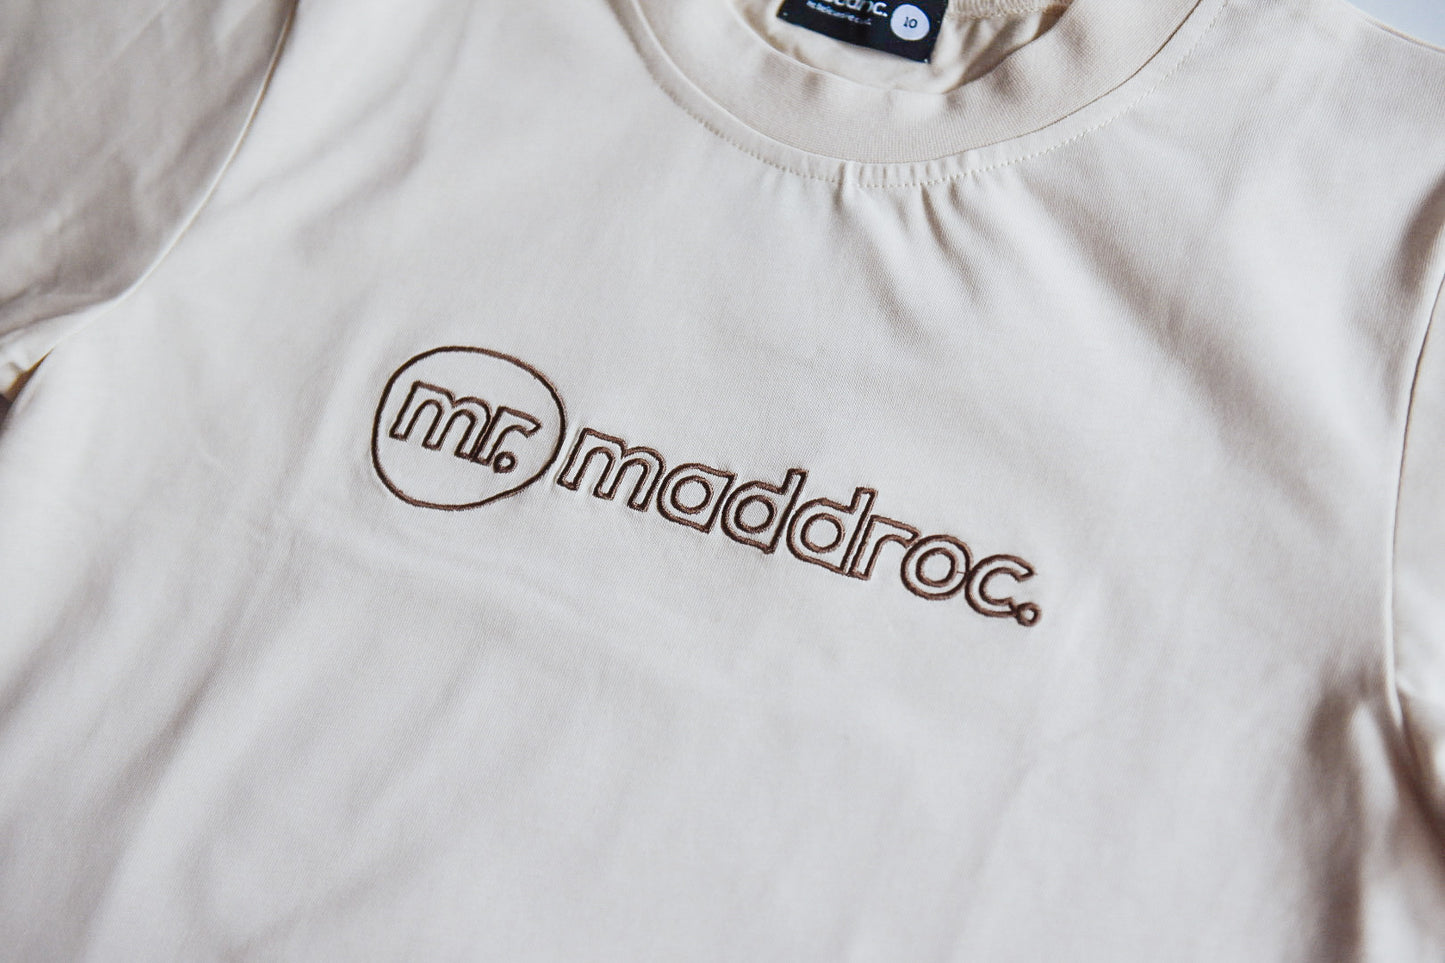 Tee Beige with Brown embroidery logo